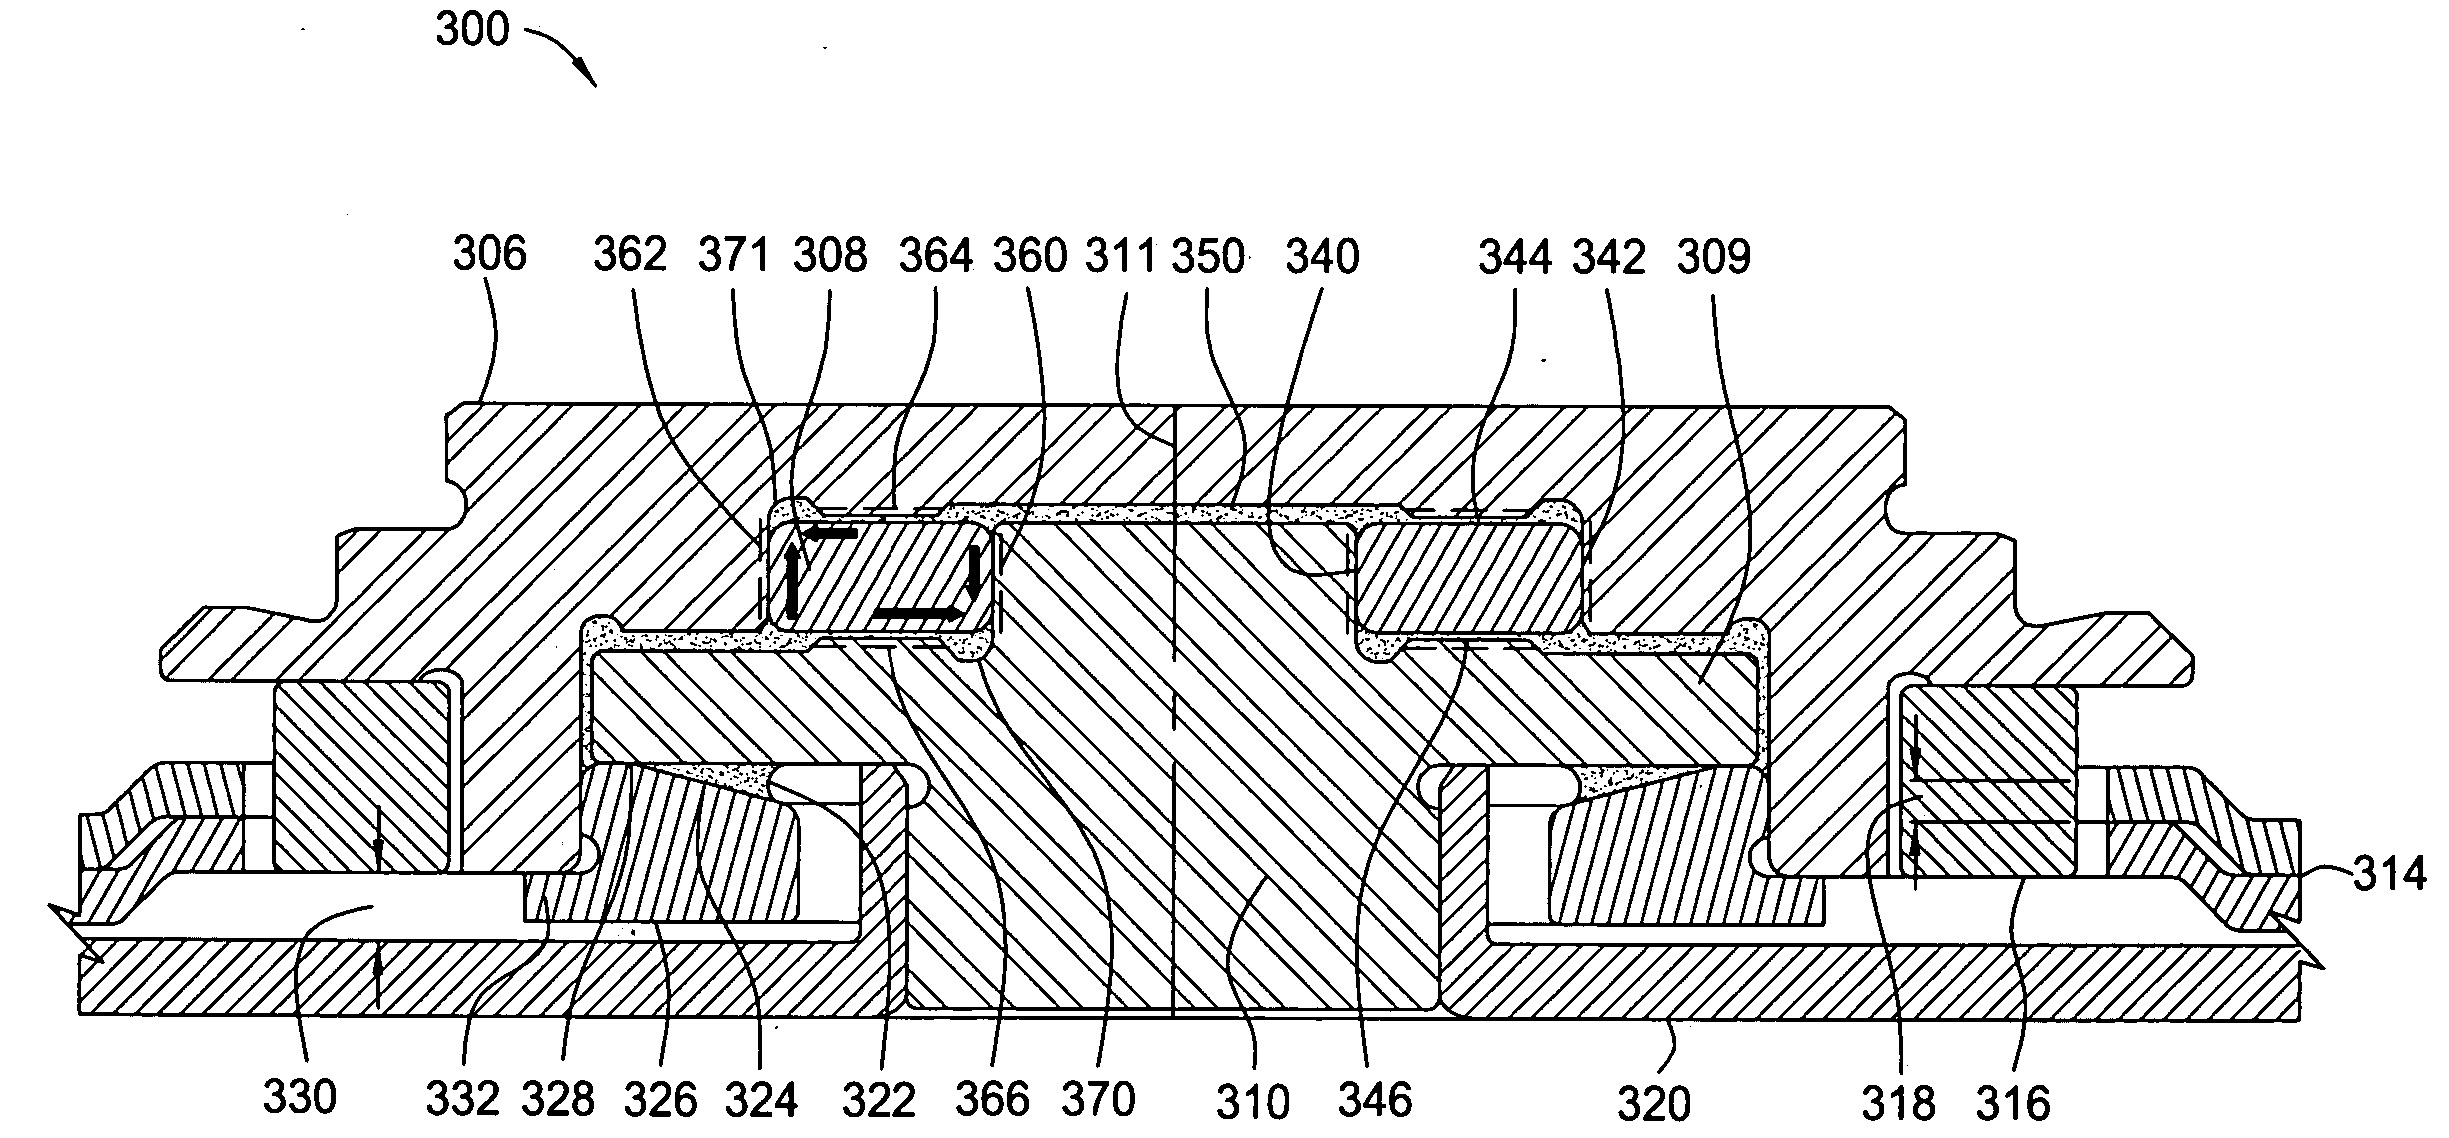 Fluid dynamic bearing configured with an orbital ring for higher efficiency